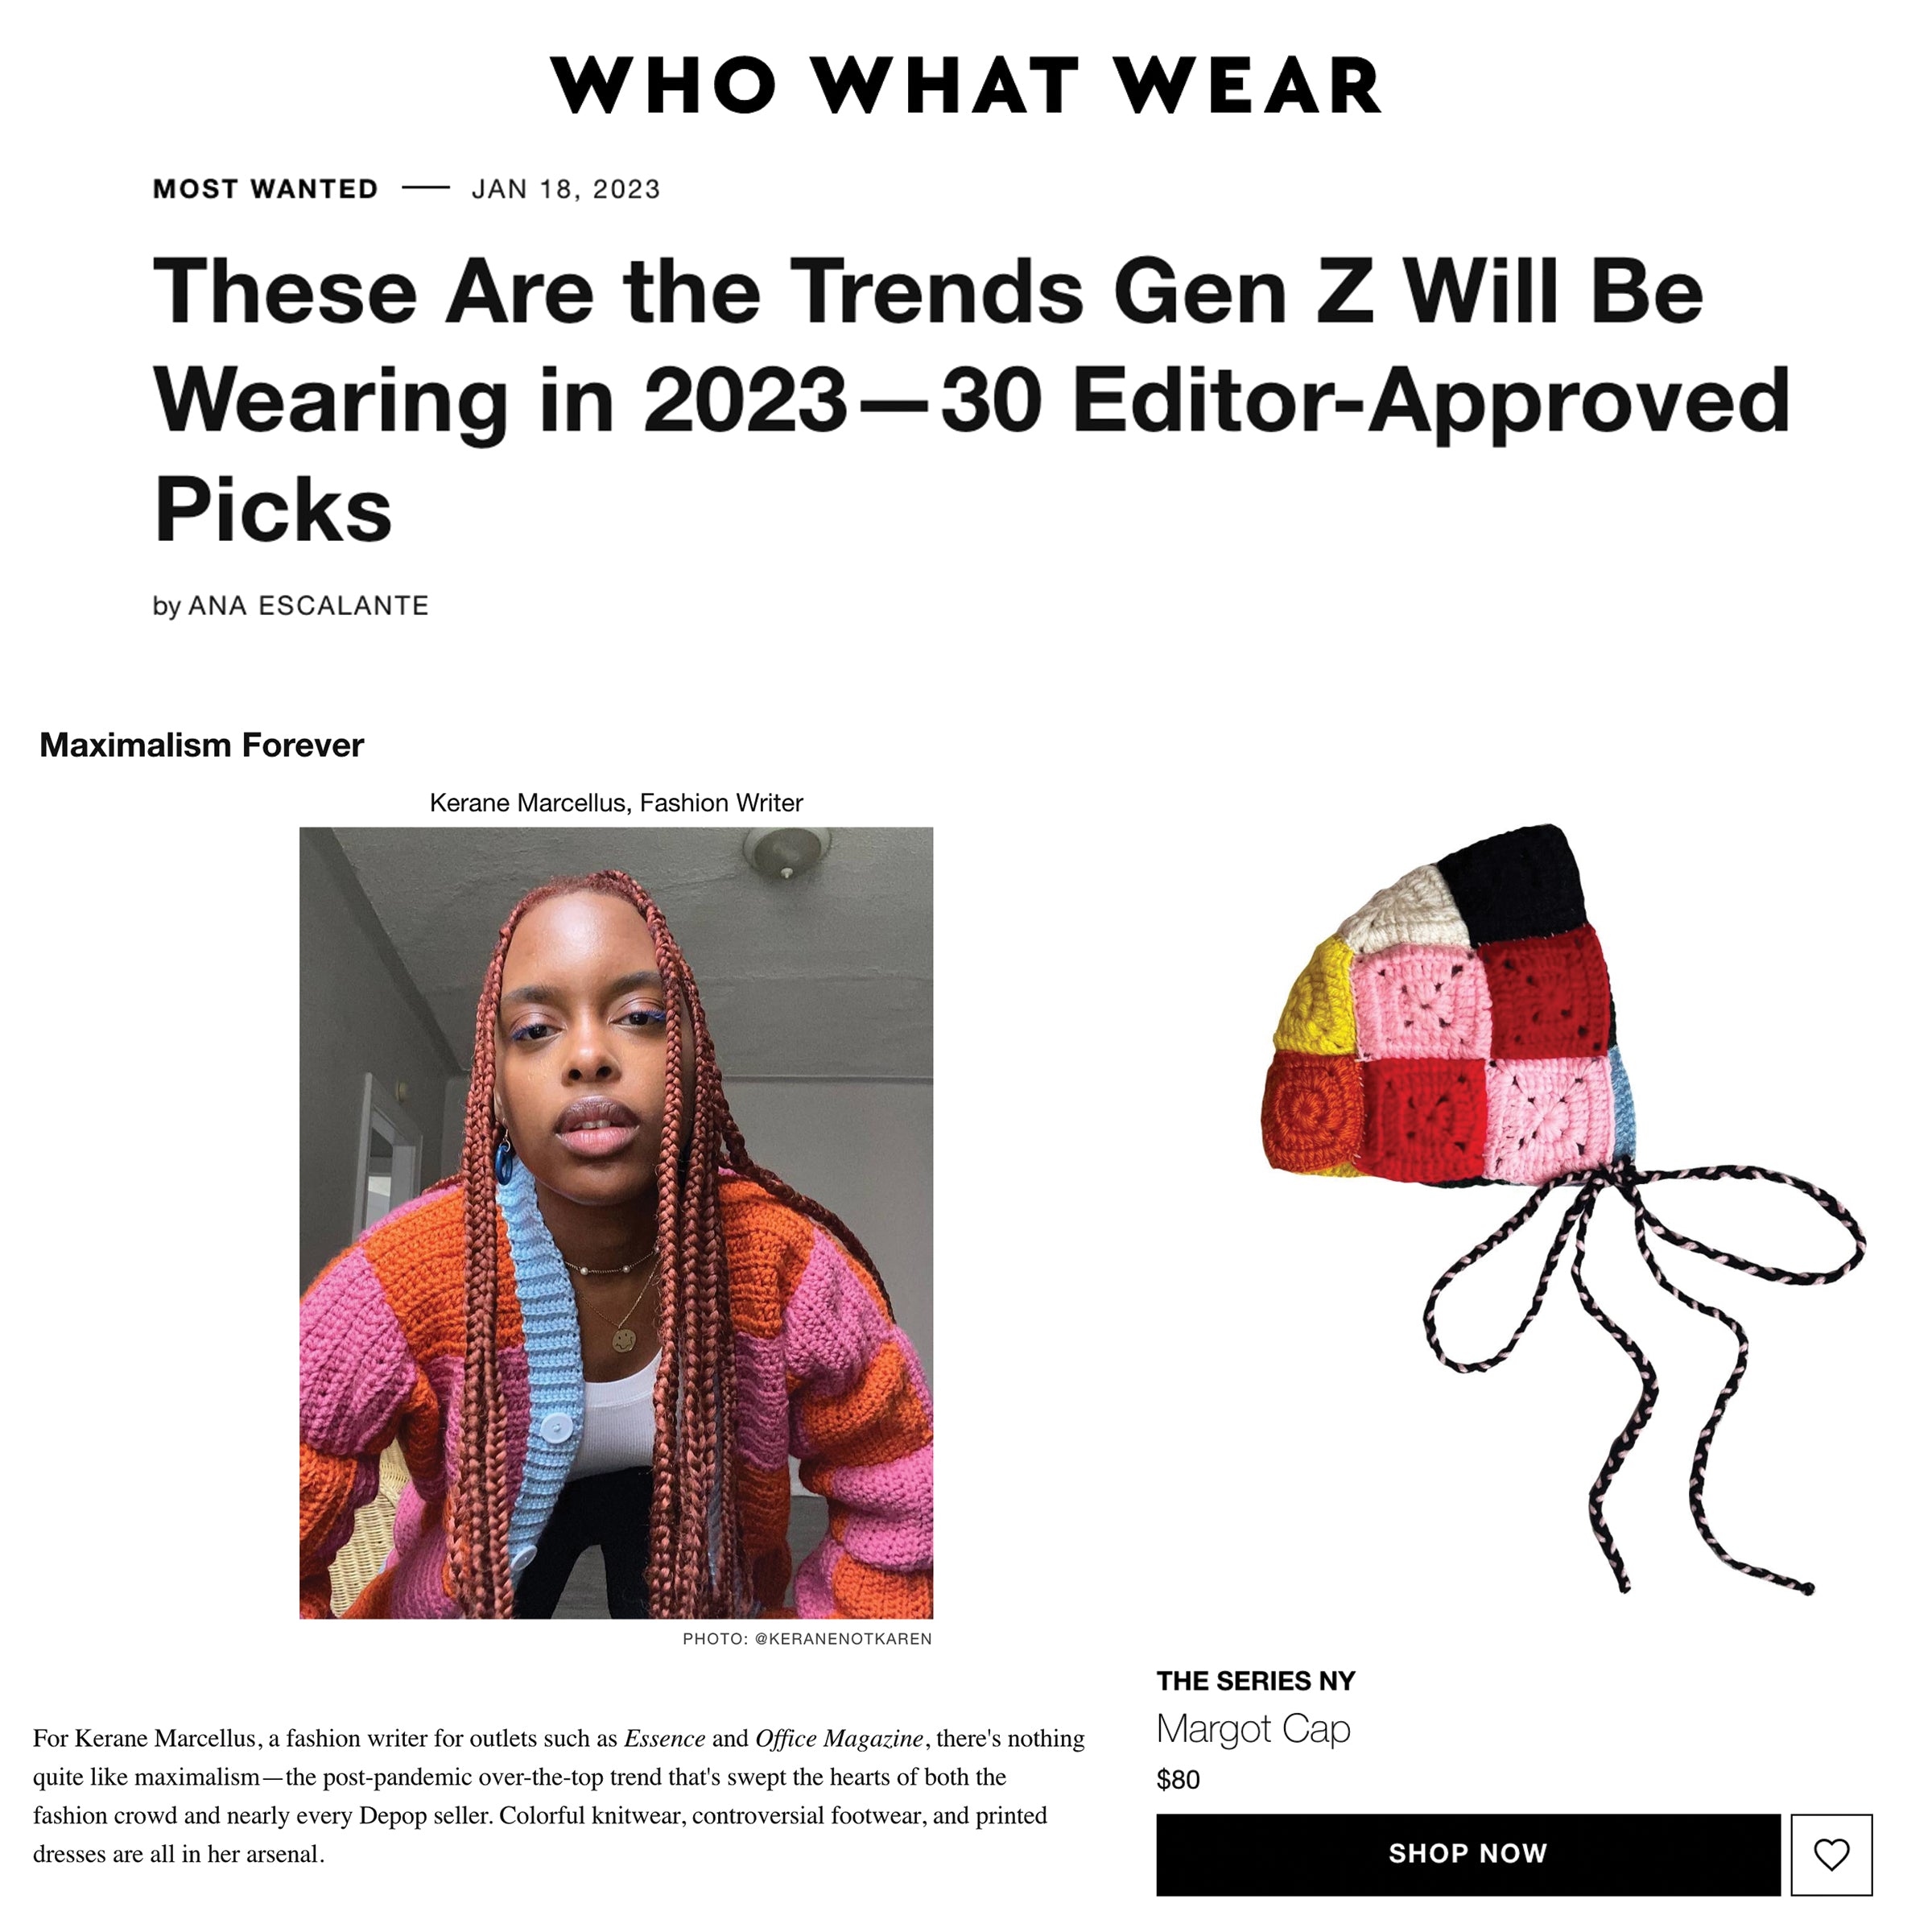 WHO WHAT WEAR | These Are the Trends Gen Z Will Be Wearing in 2023